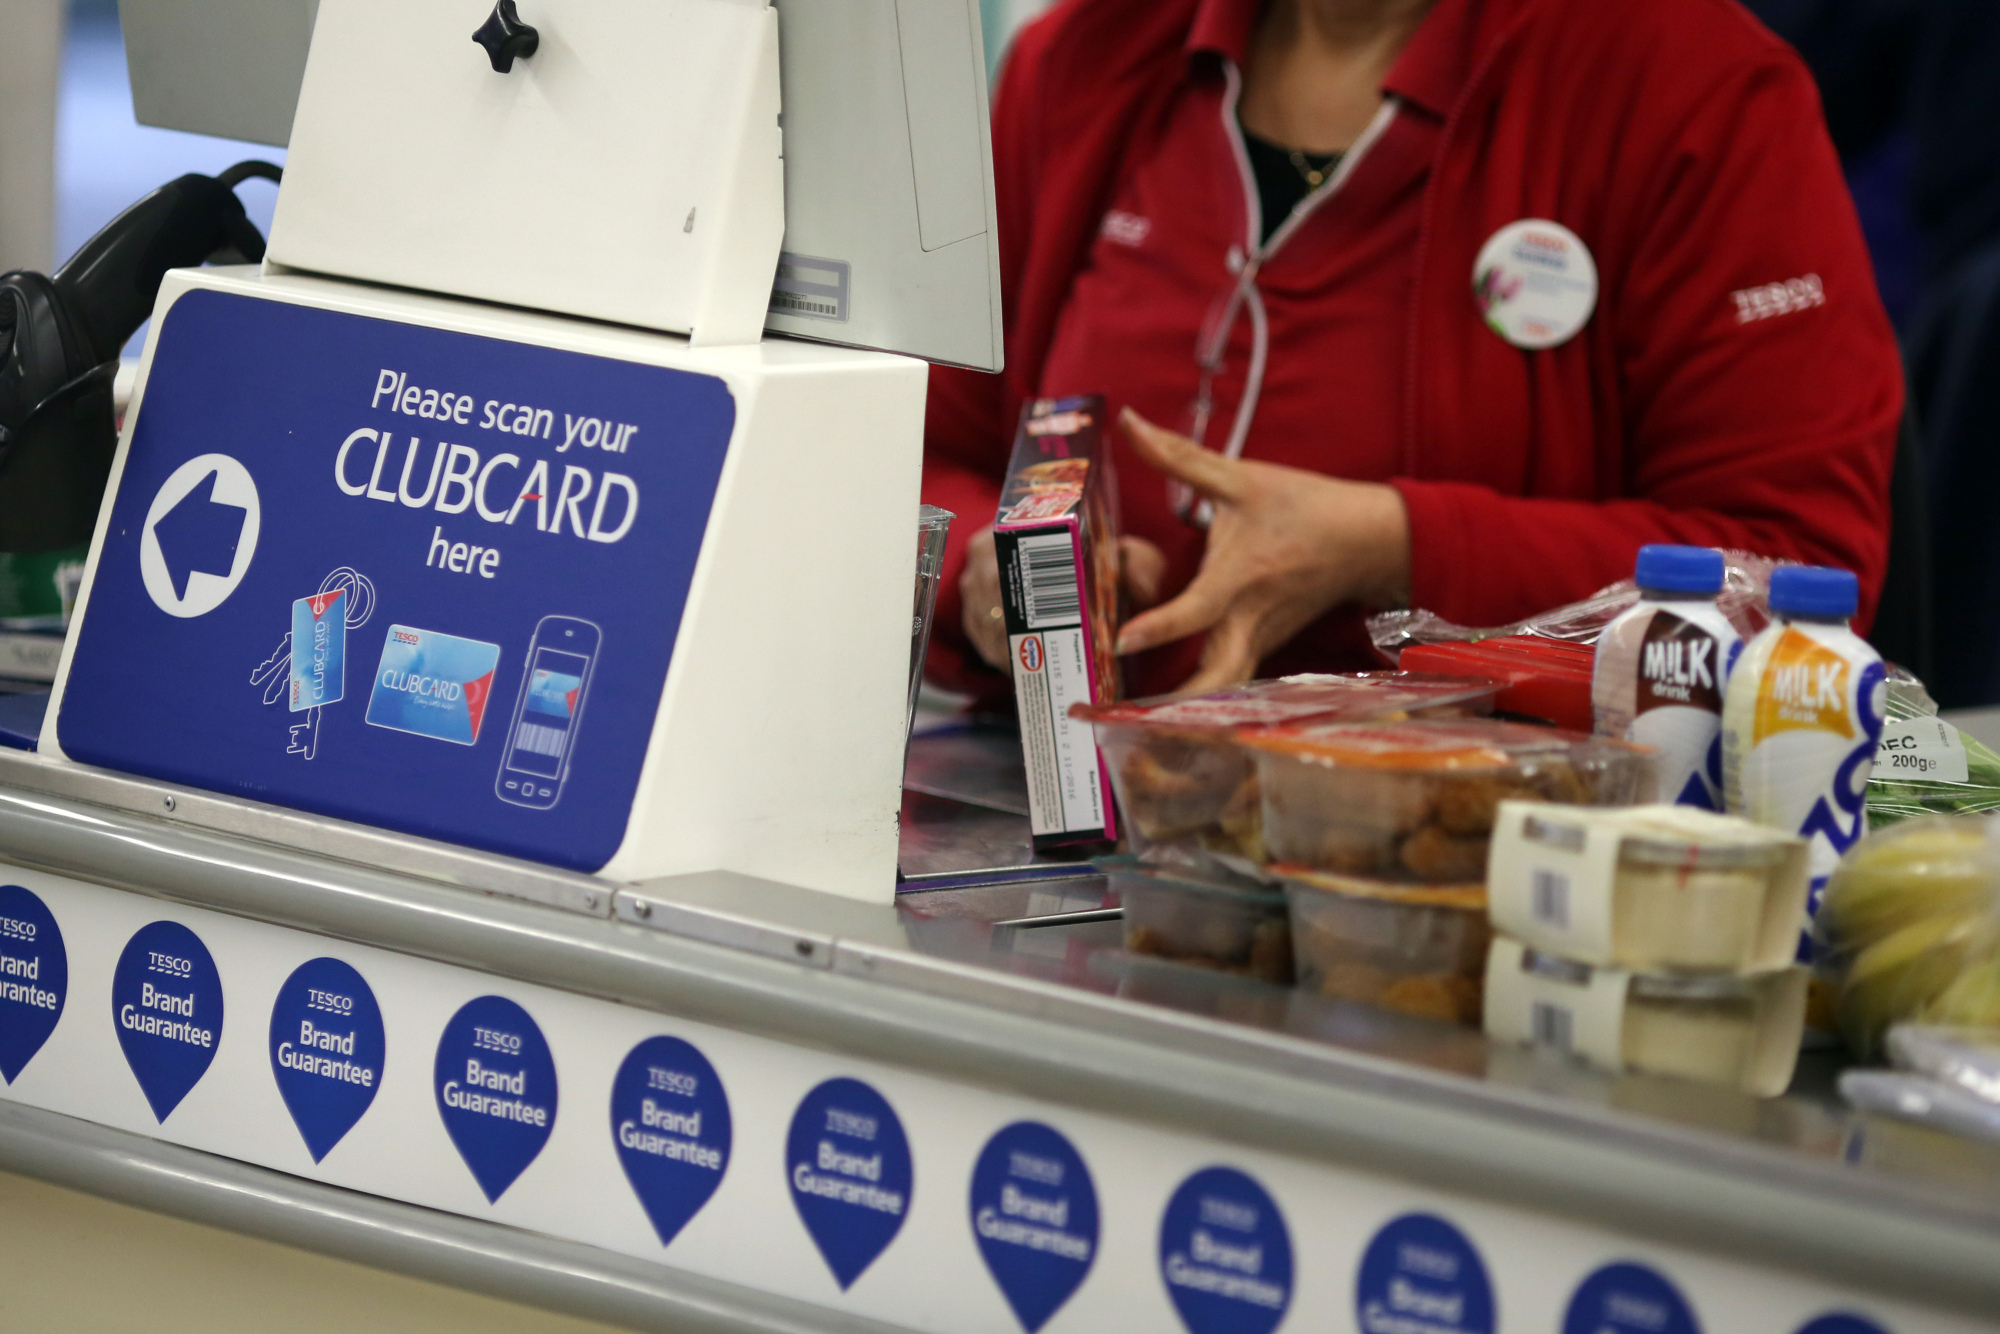 Tesco Booker Takeover Is Working Out - Bloomberg